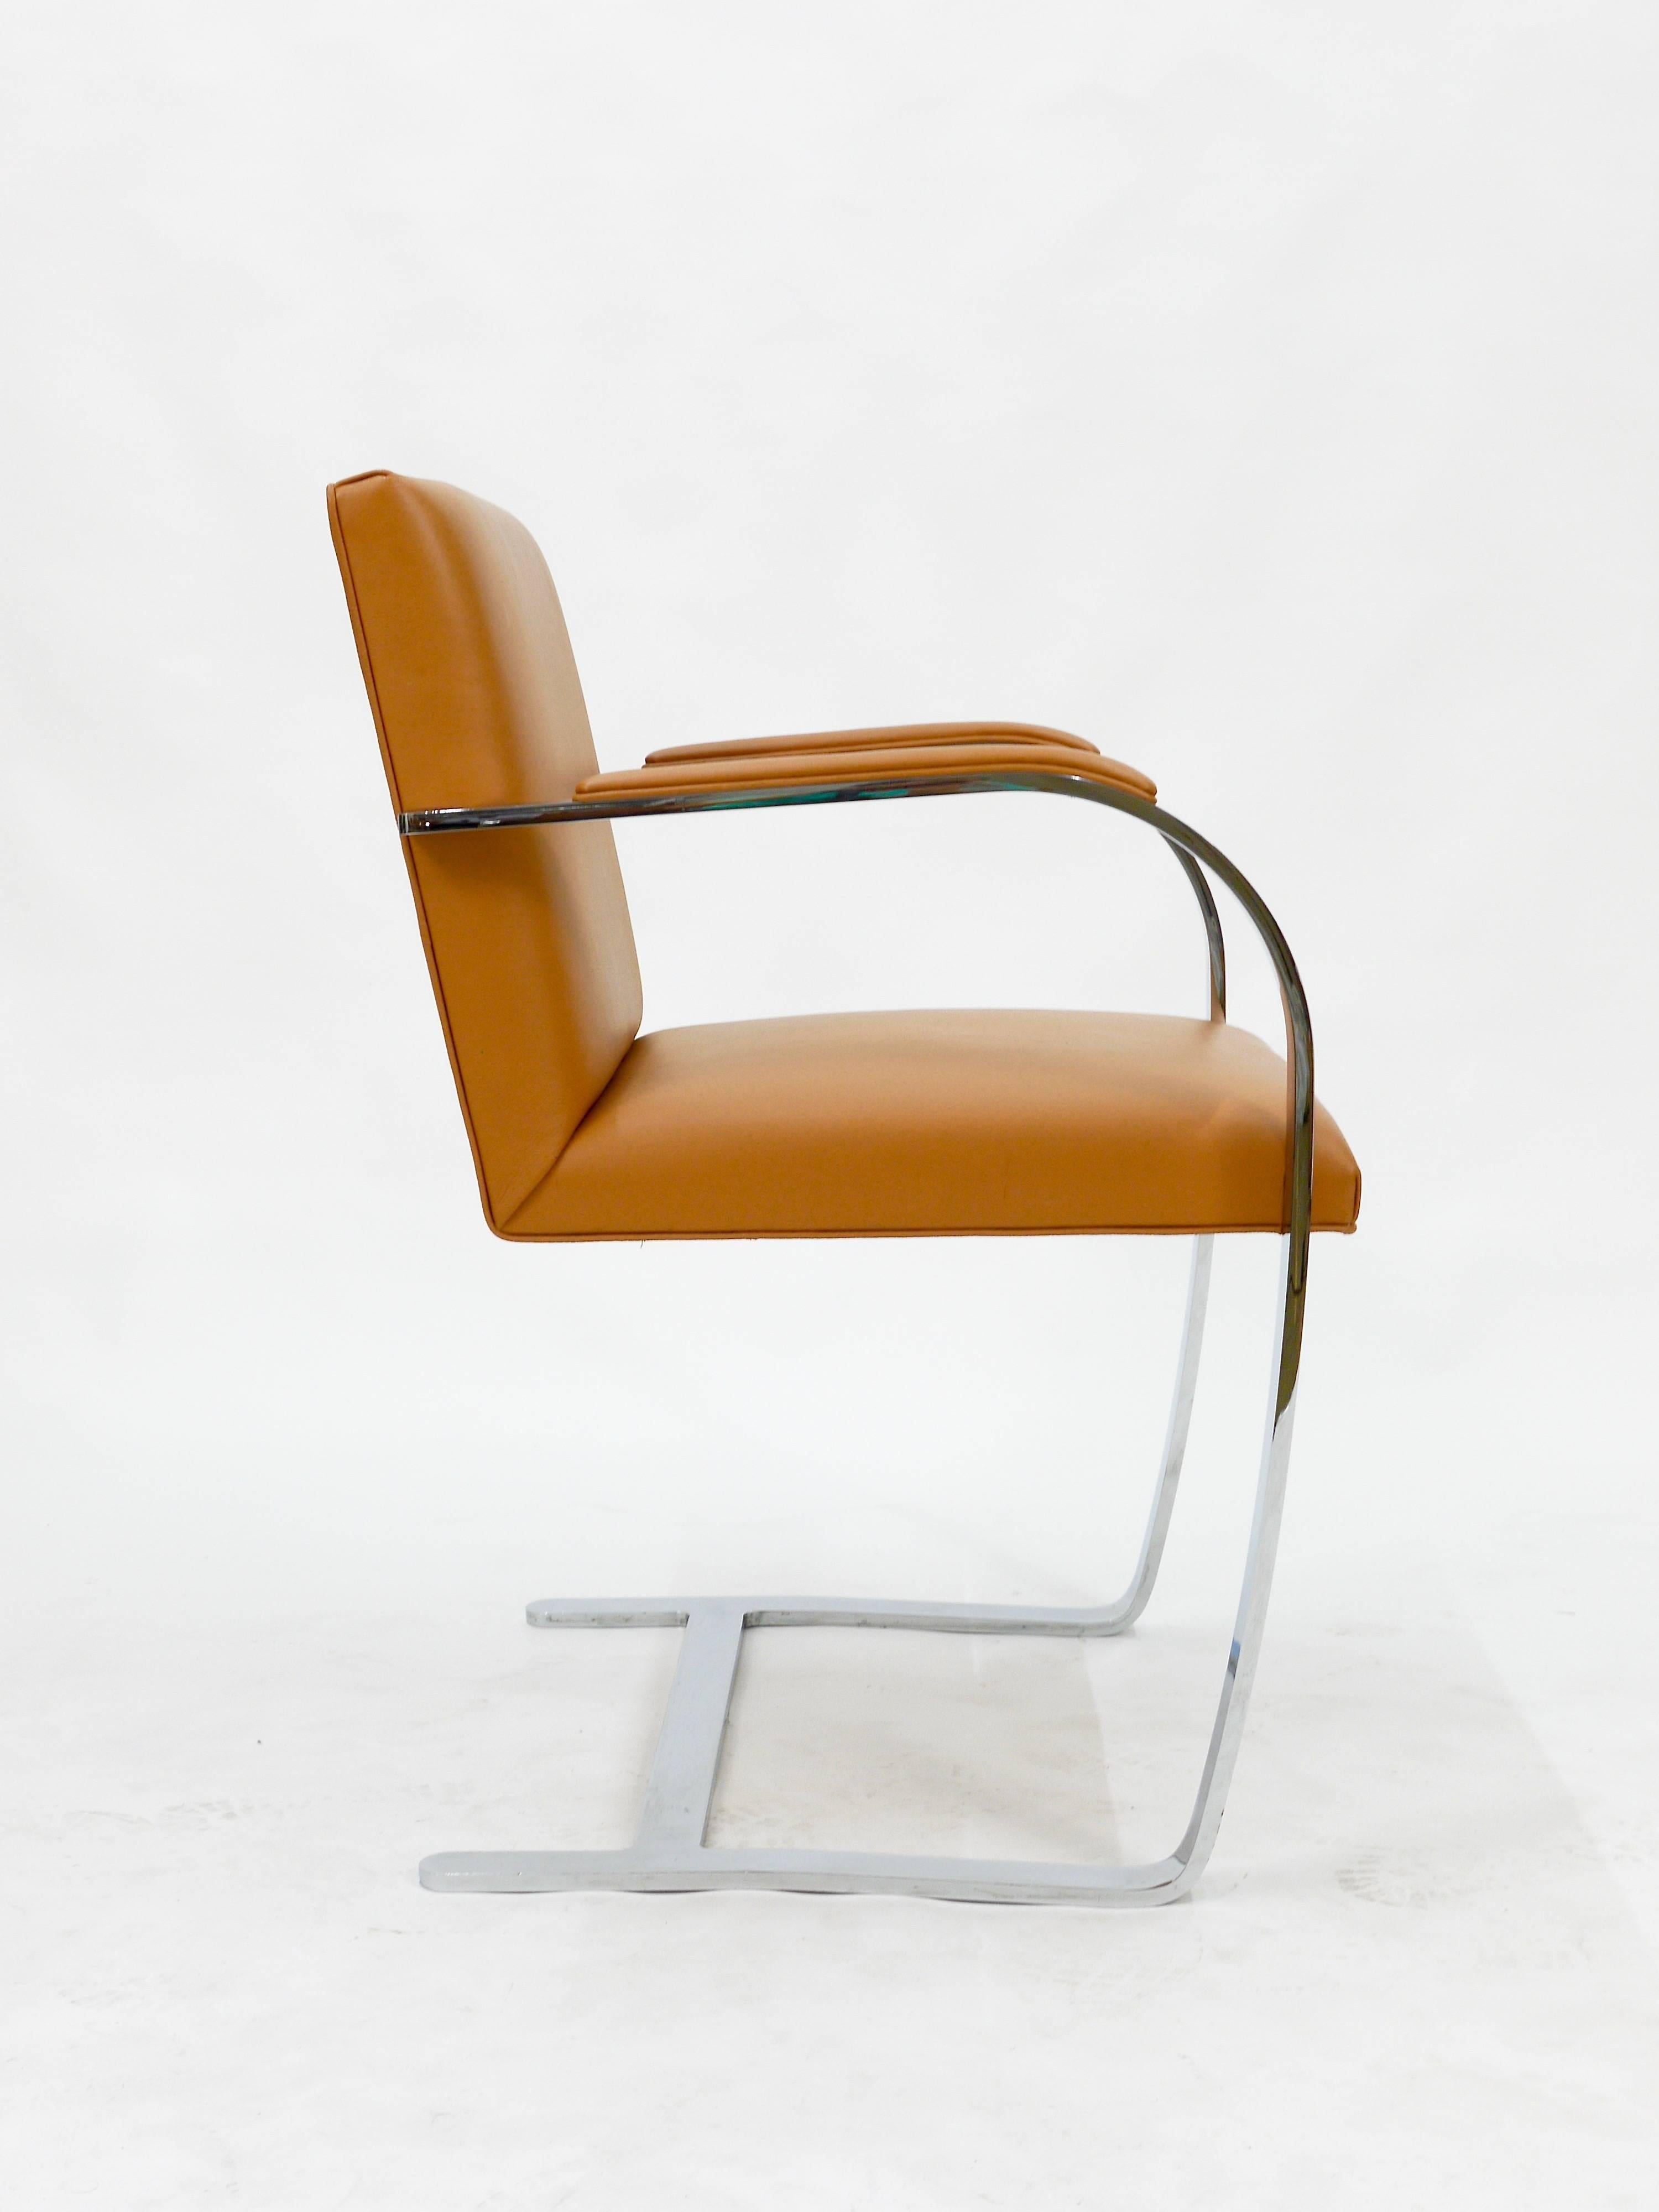 Bauhaus Six Cognac Brno Leather Chairs by Ludwig Mies van der Rohe, Knoll